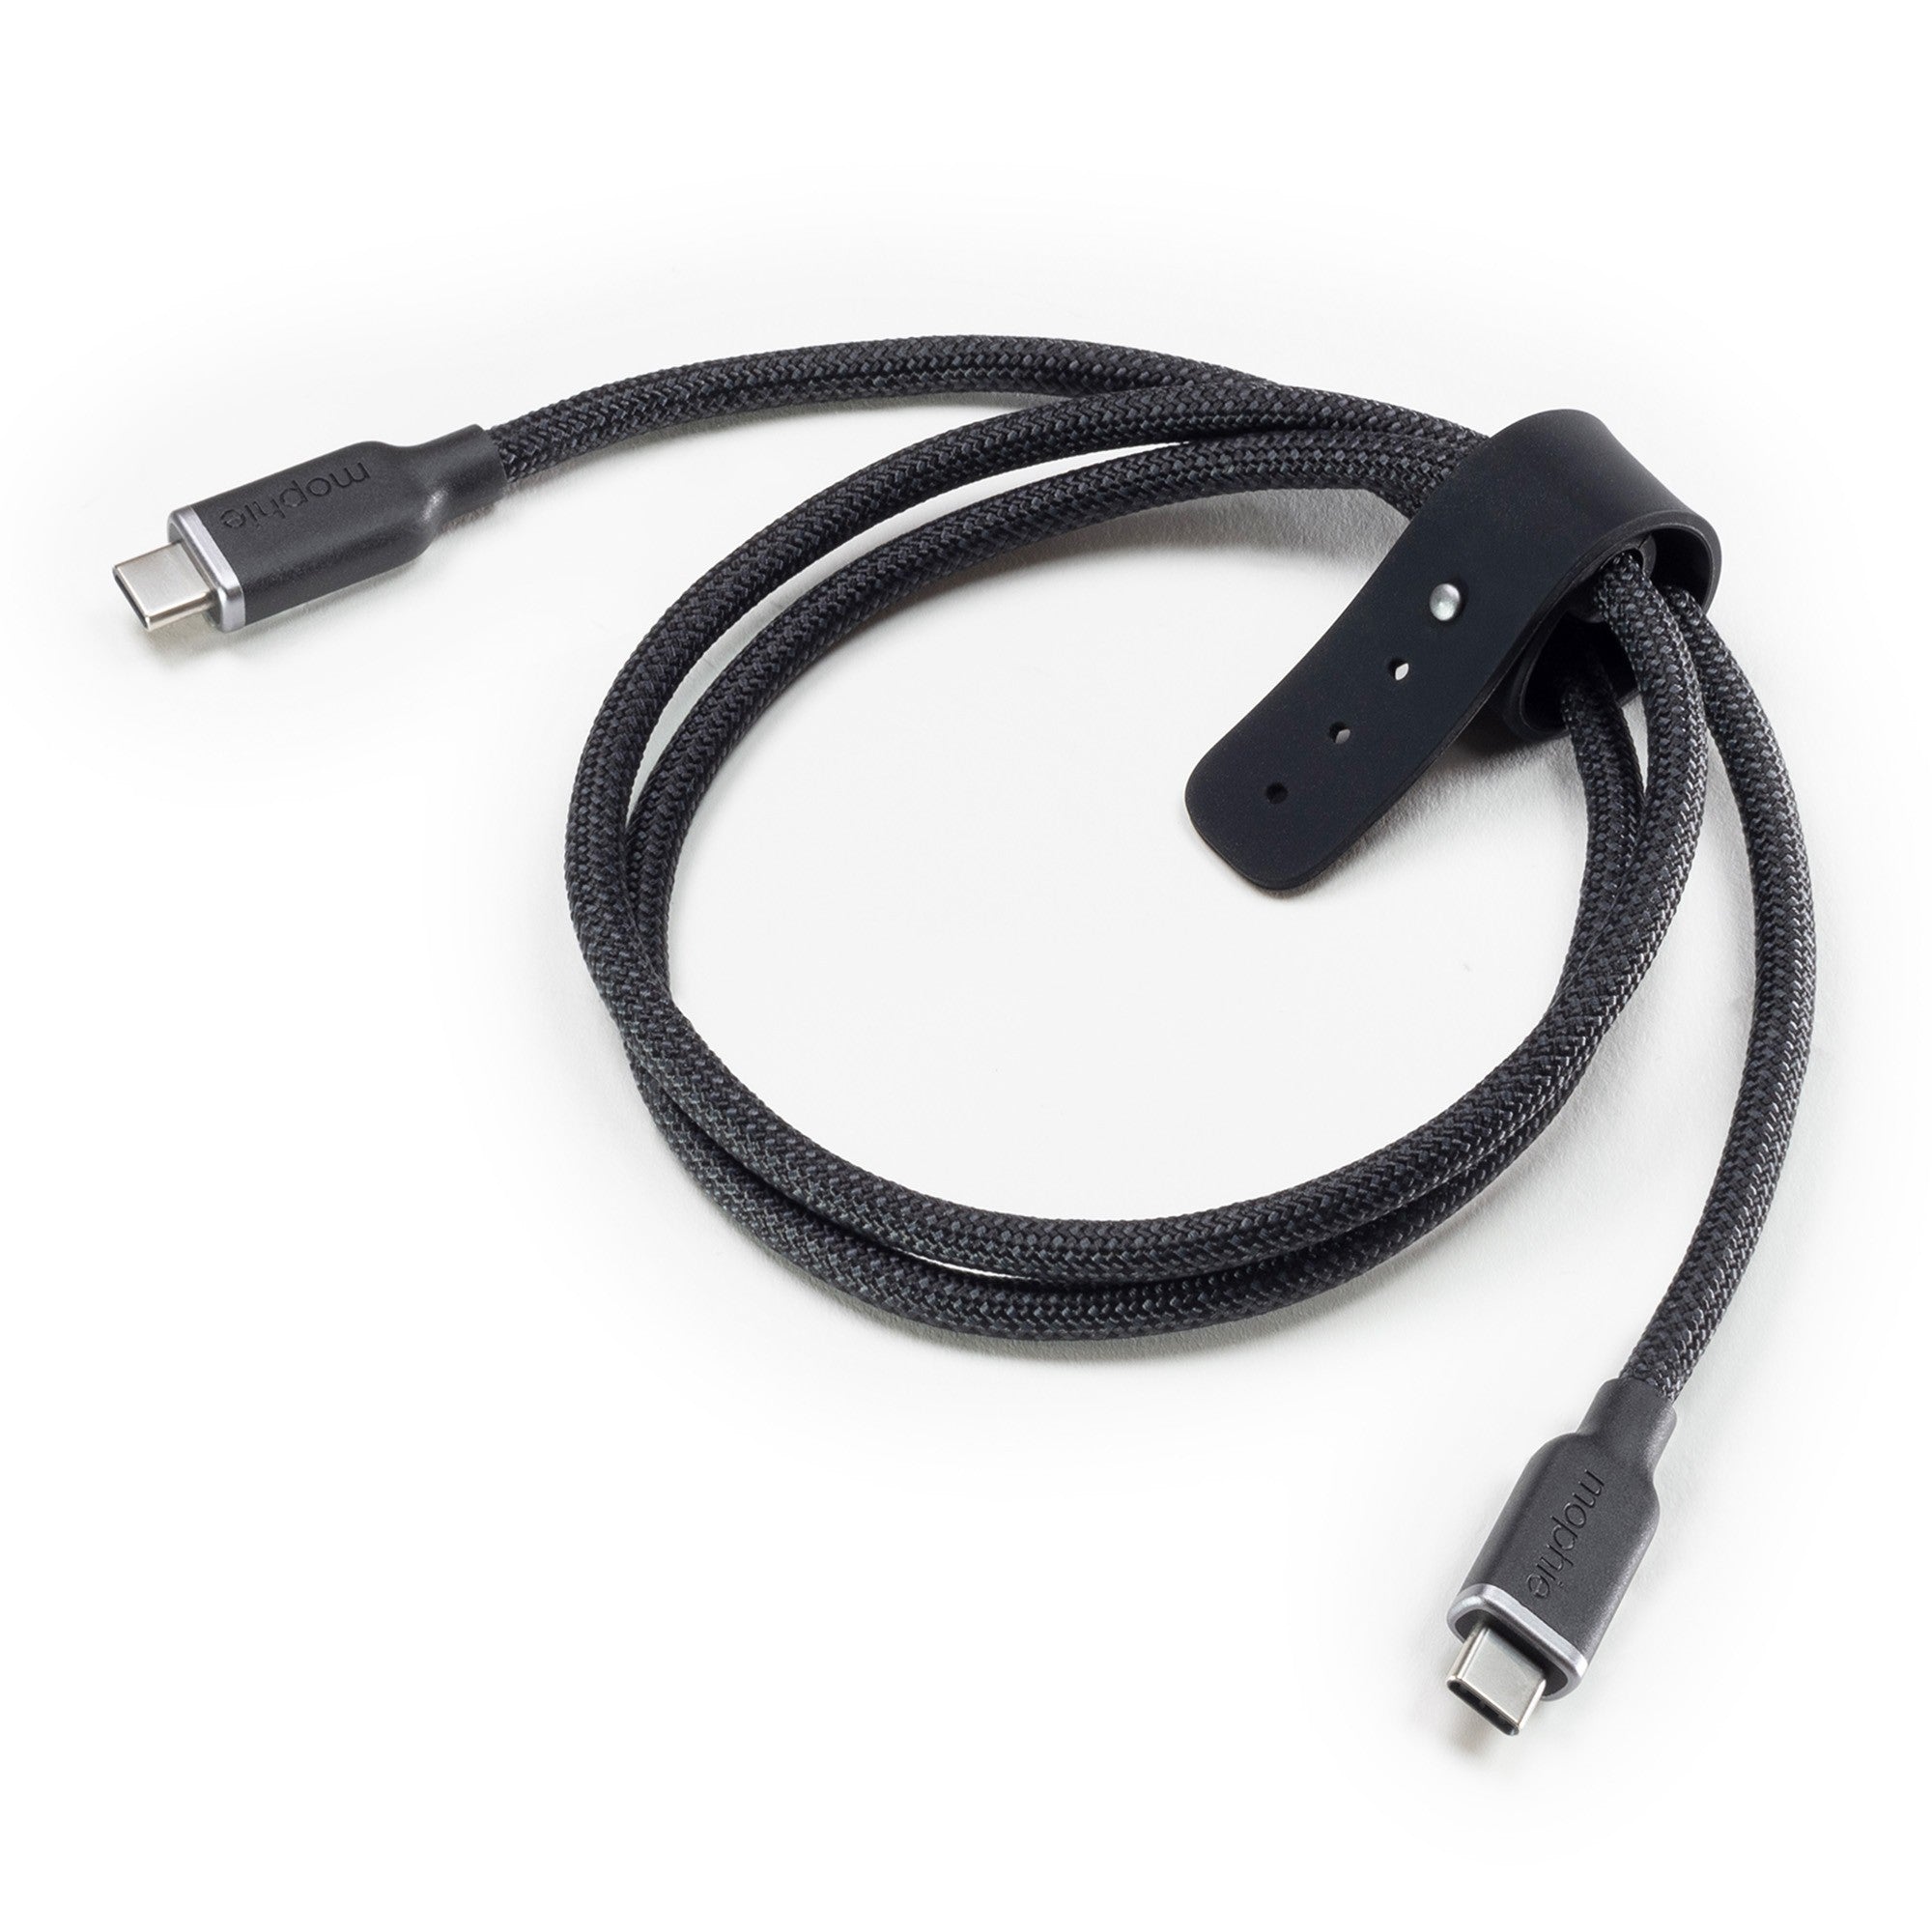 Mophie 80cm USB4 USB-C to USB-C Charge and Sync Cable - Black - 15-12594